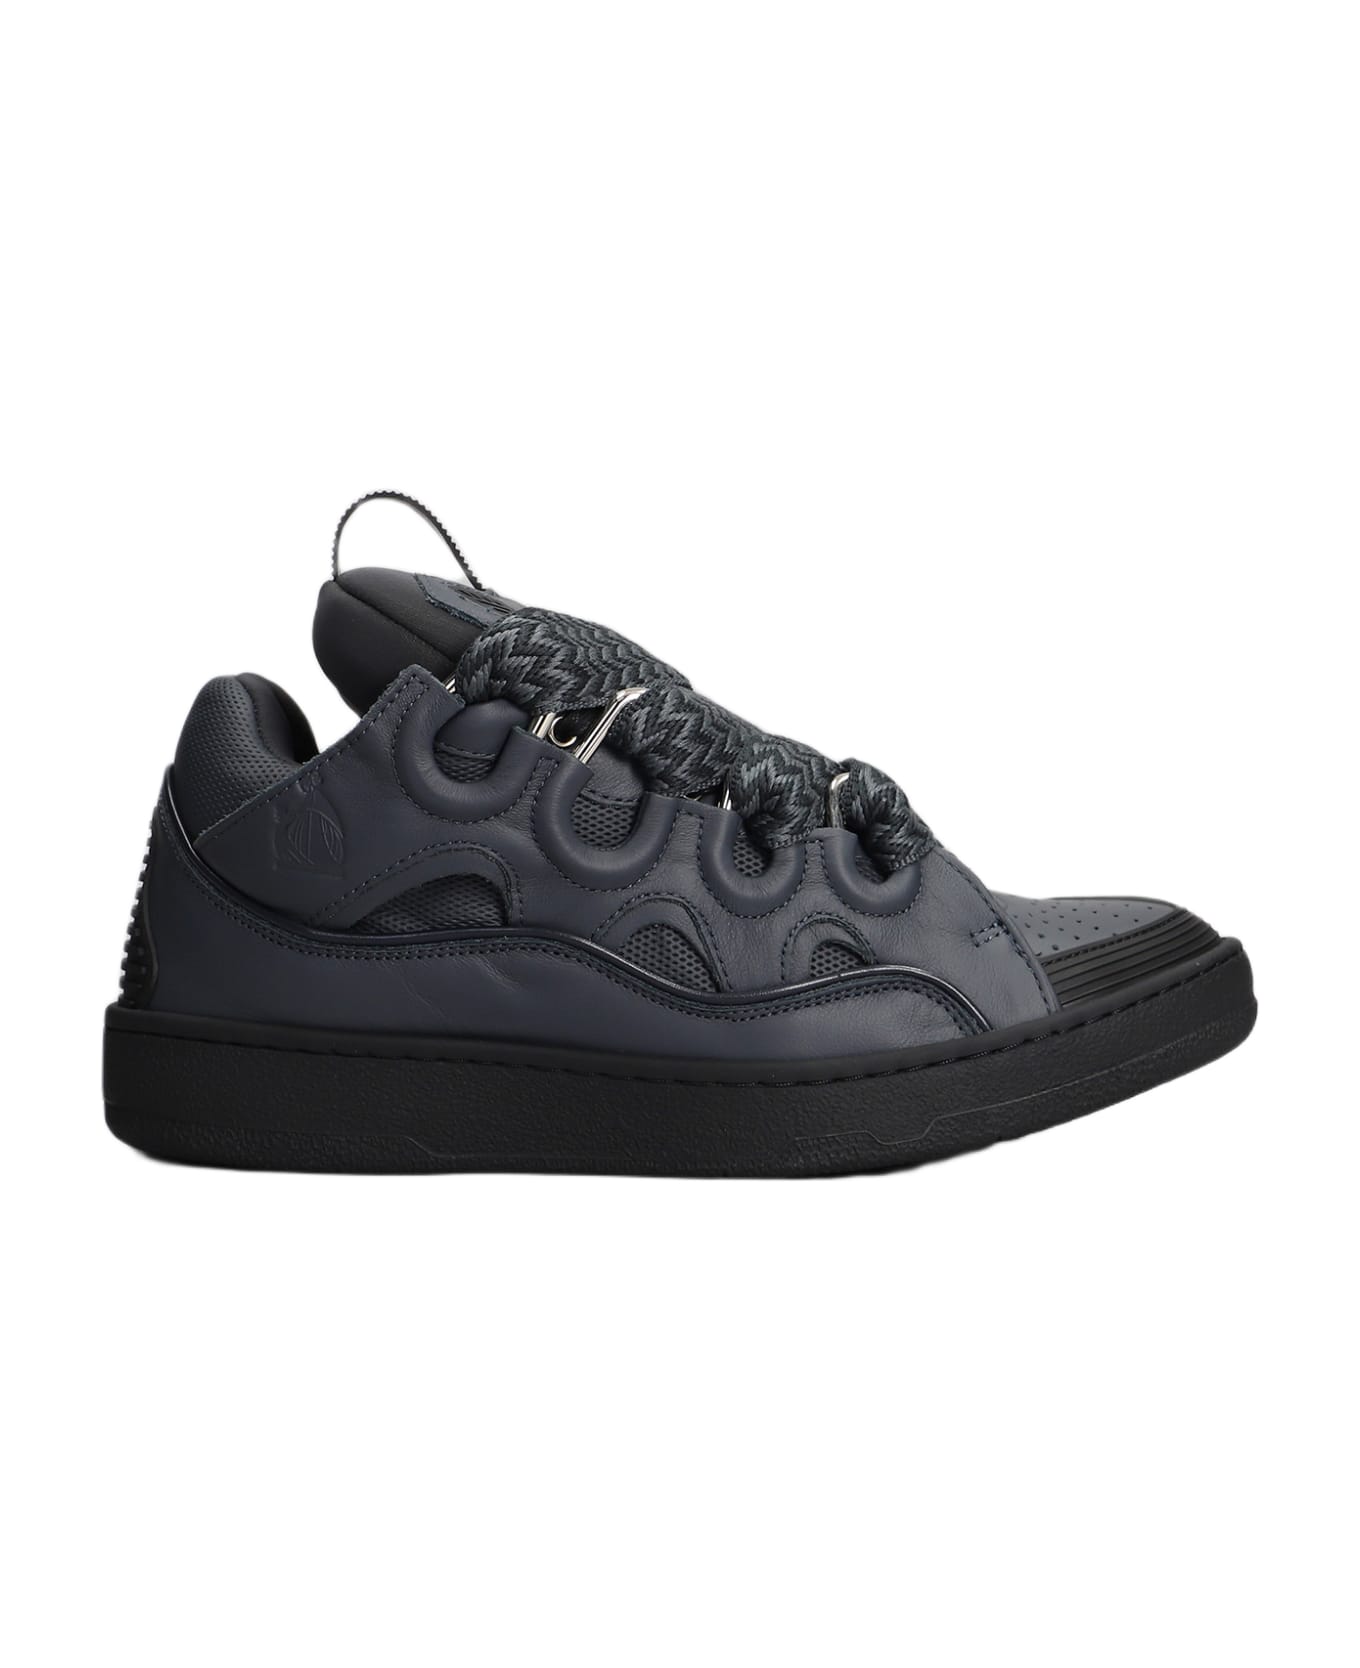 Lanvin Curb Sneakers In Grey Leather - grey スニーカー